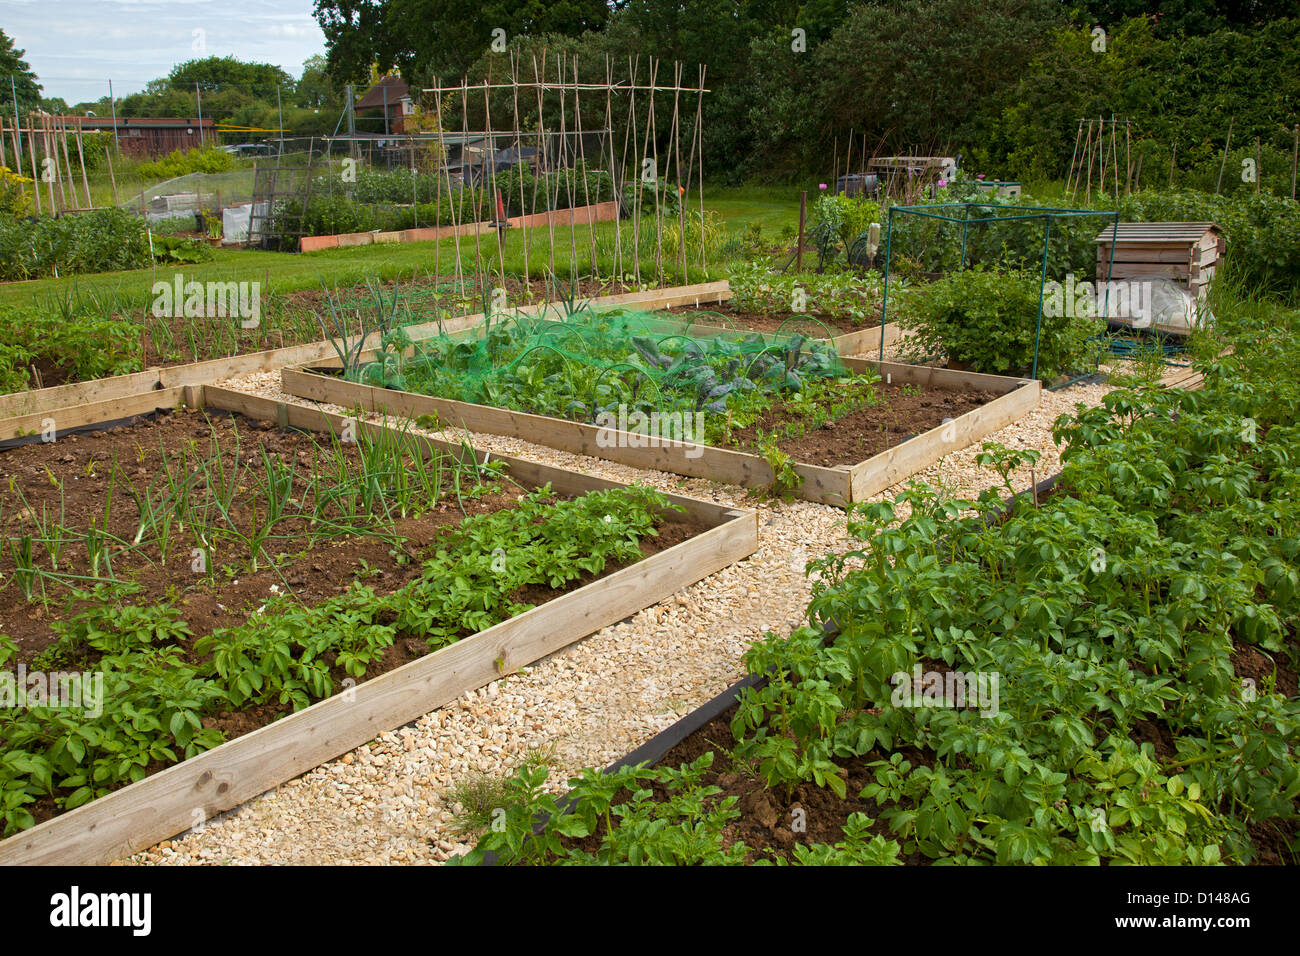 Raised beds on English Allotment with potatoes, onions runner bean steaks, wooden compost bin and gravel paths Stock Photo